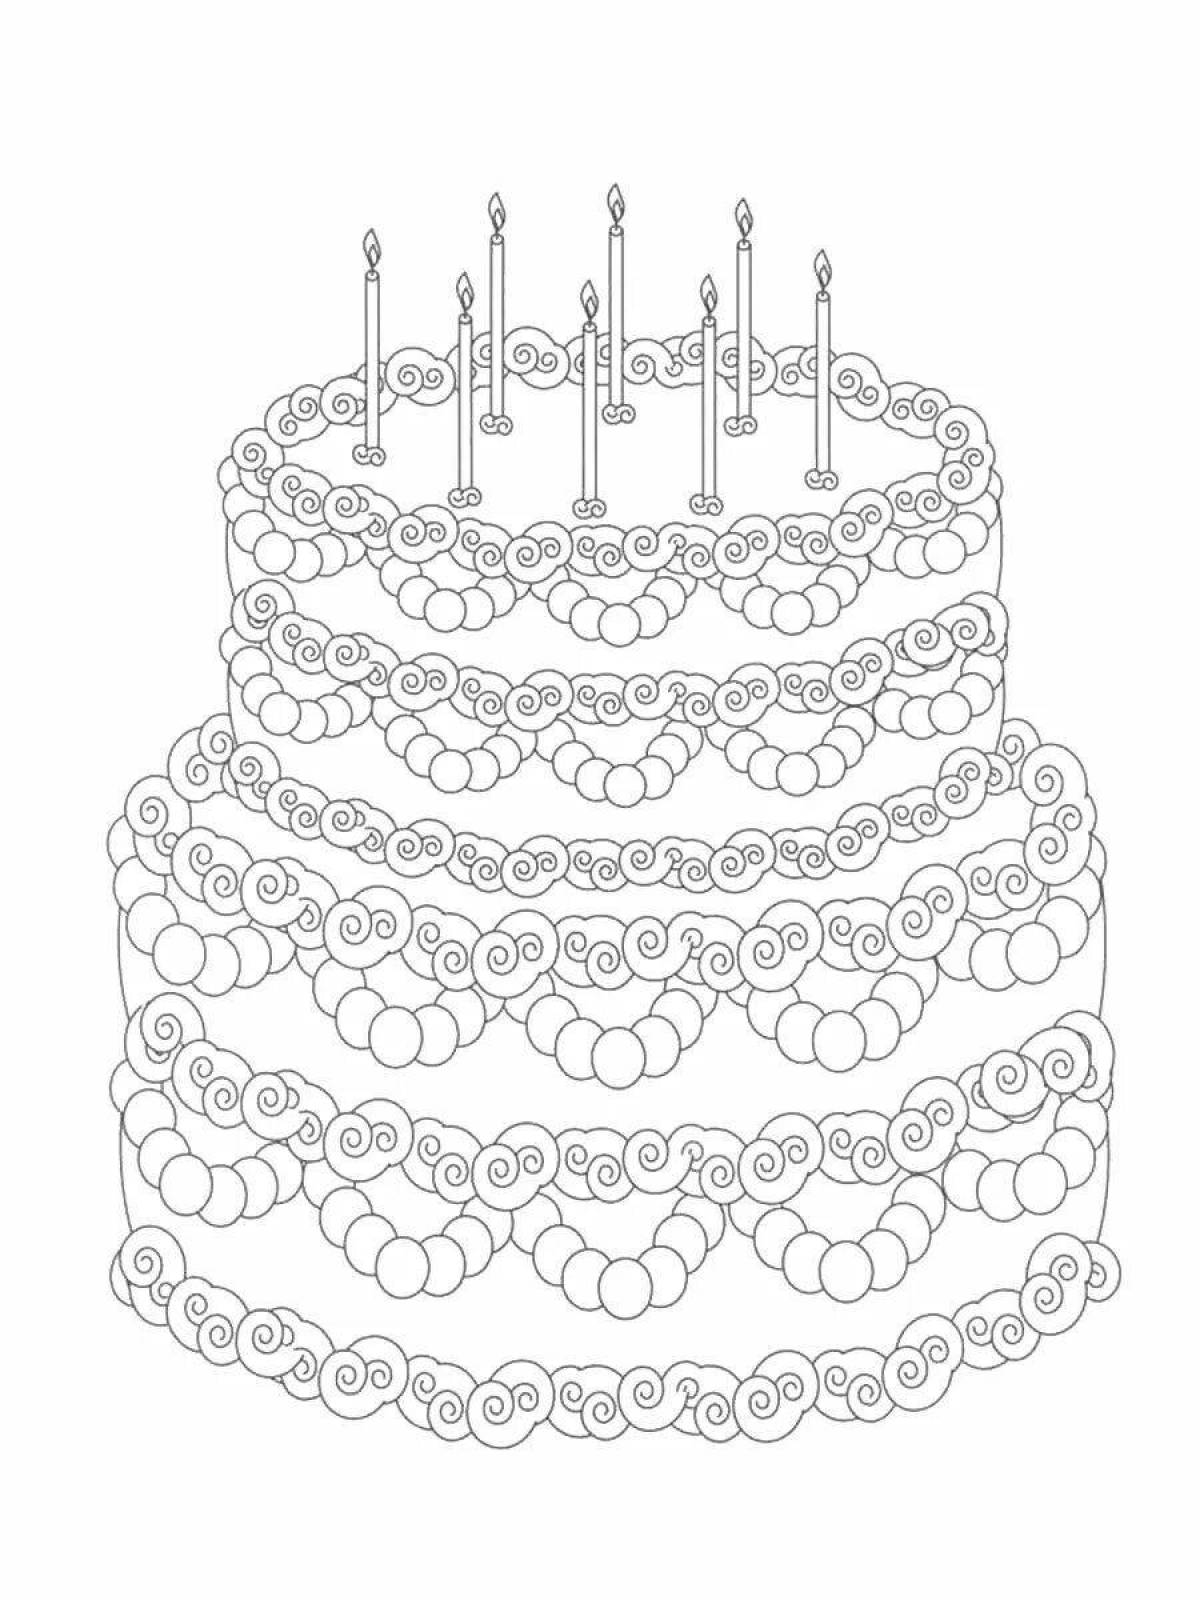 Colored explosive birthday cake coloring book